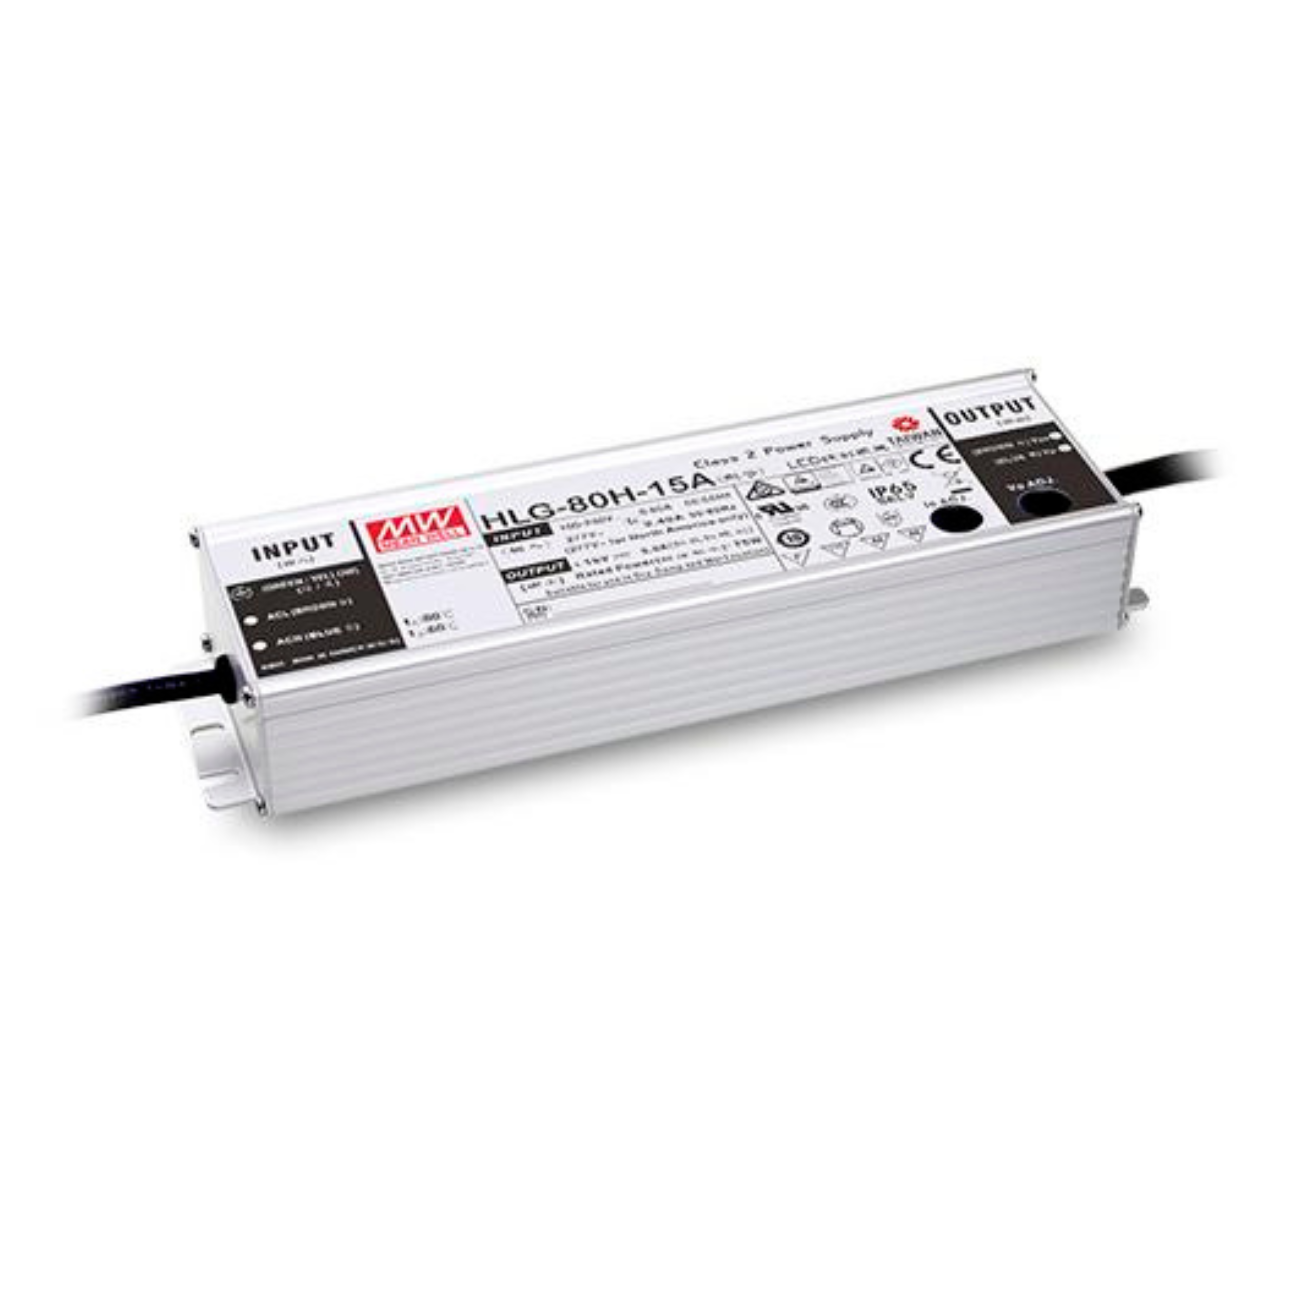 MeanWell HLG-80H-48B (81,6W/48) LED-Netzteil (dimmbar)